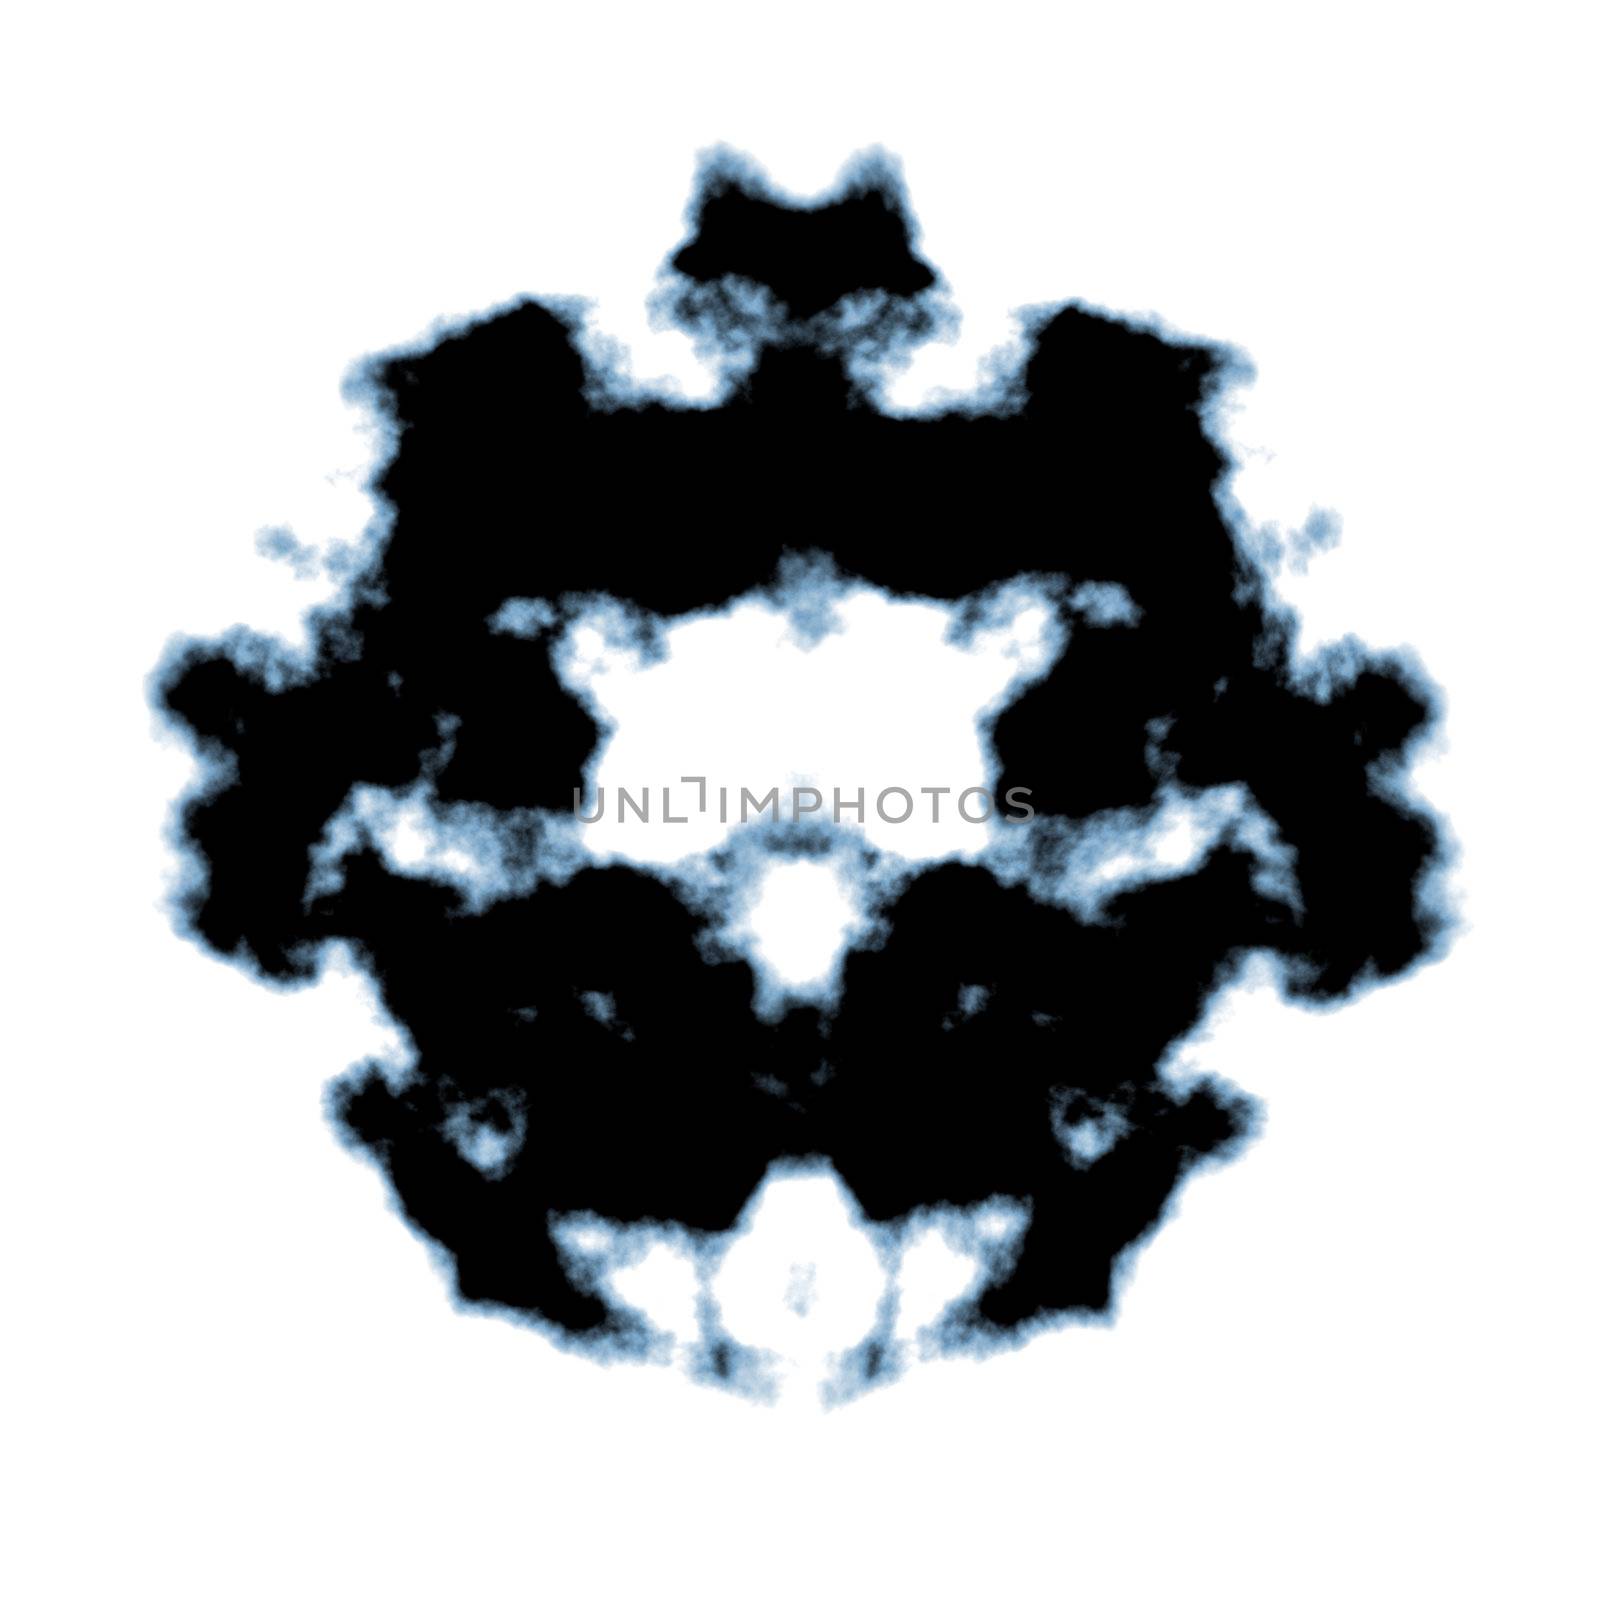 An image of a nice Rorschach graphic